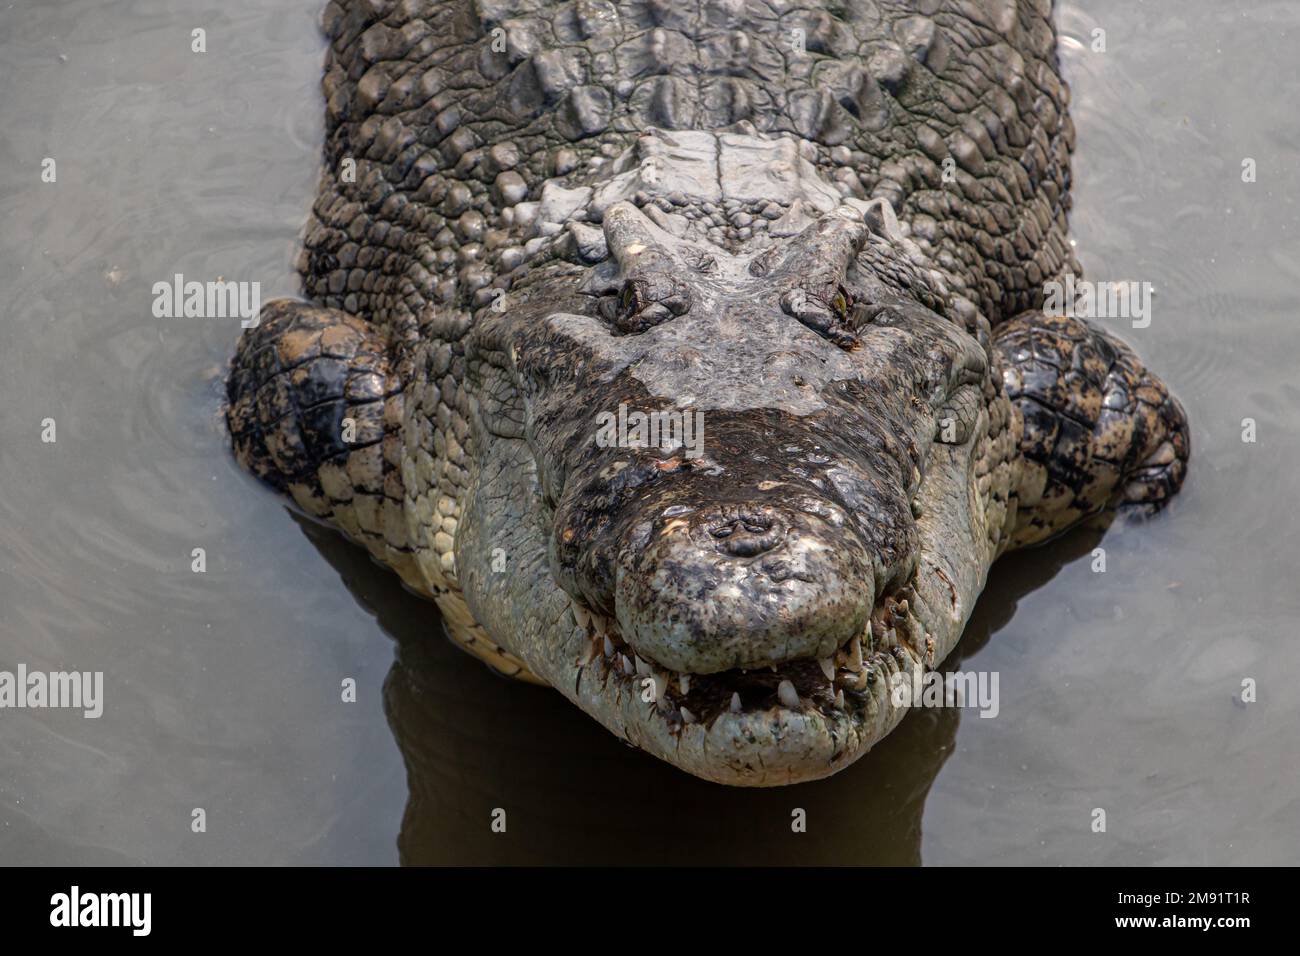 Crocodile is looking from the water Stock Photo